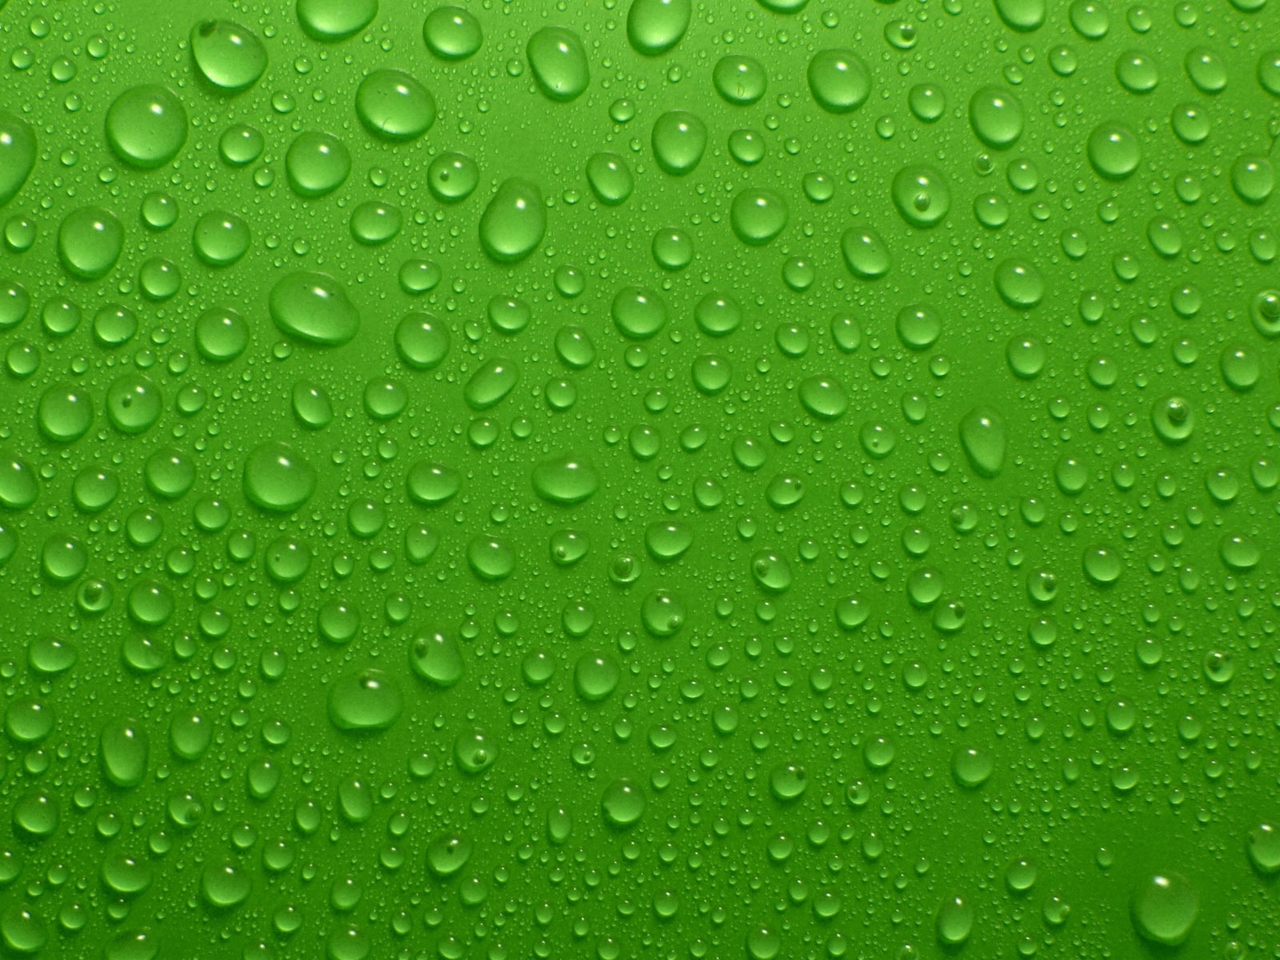 Image: Drops, water, background, green